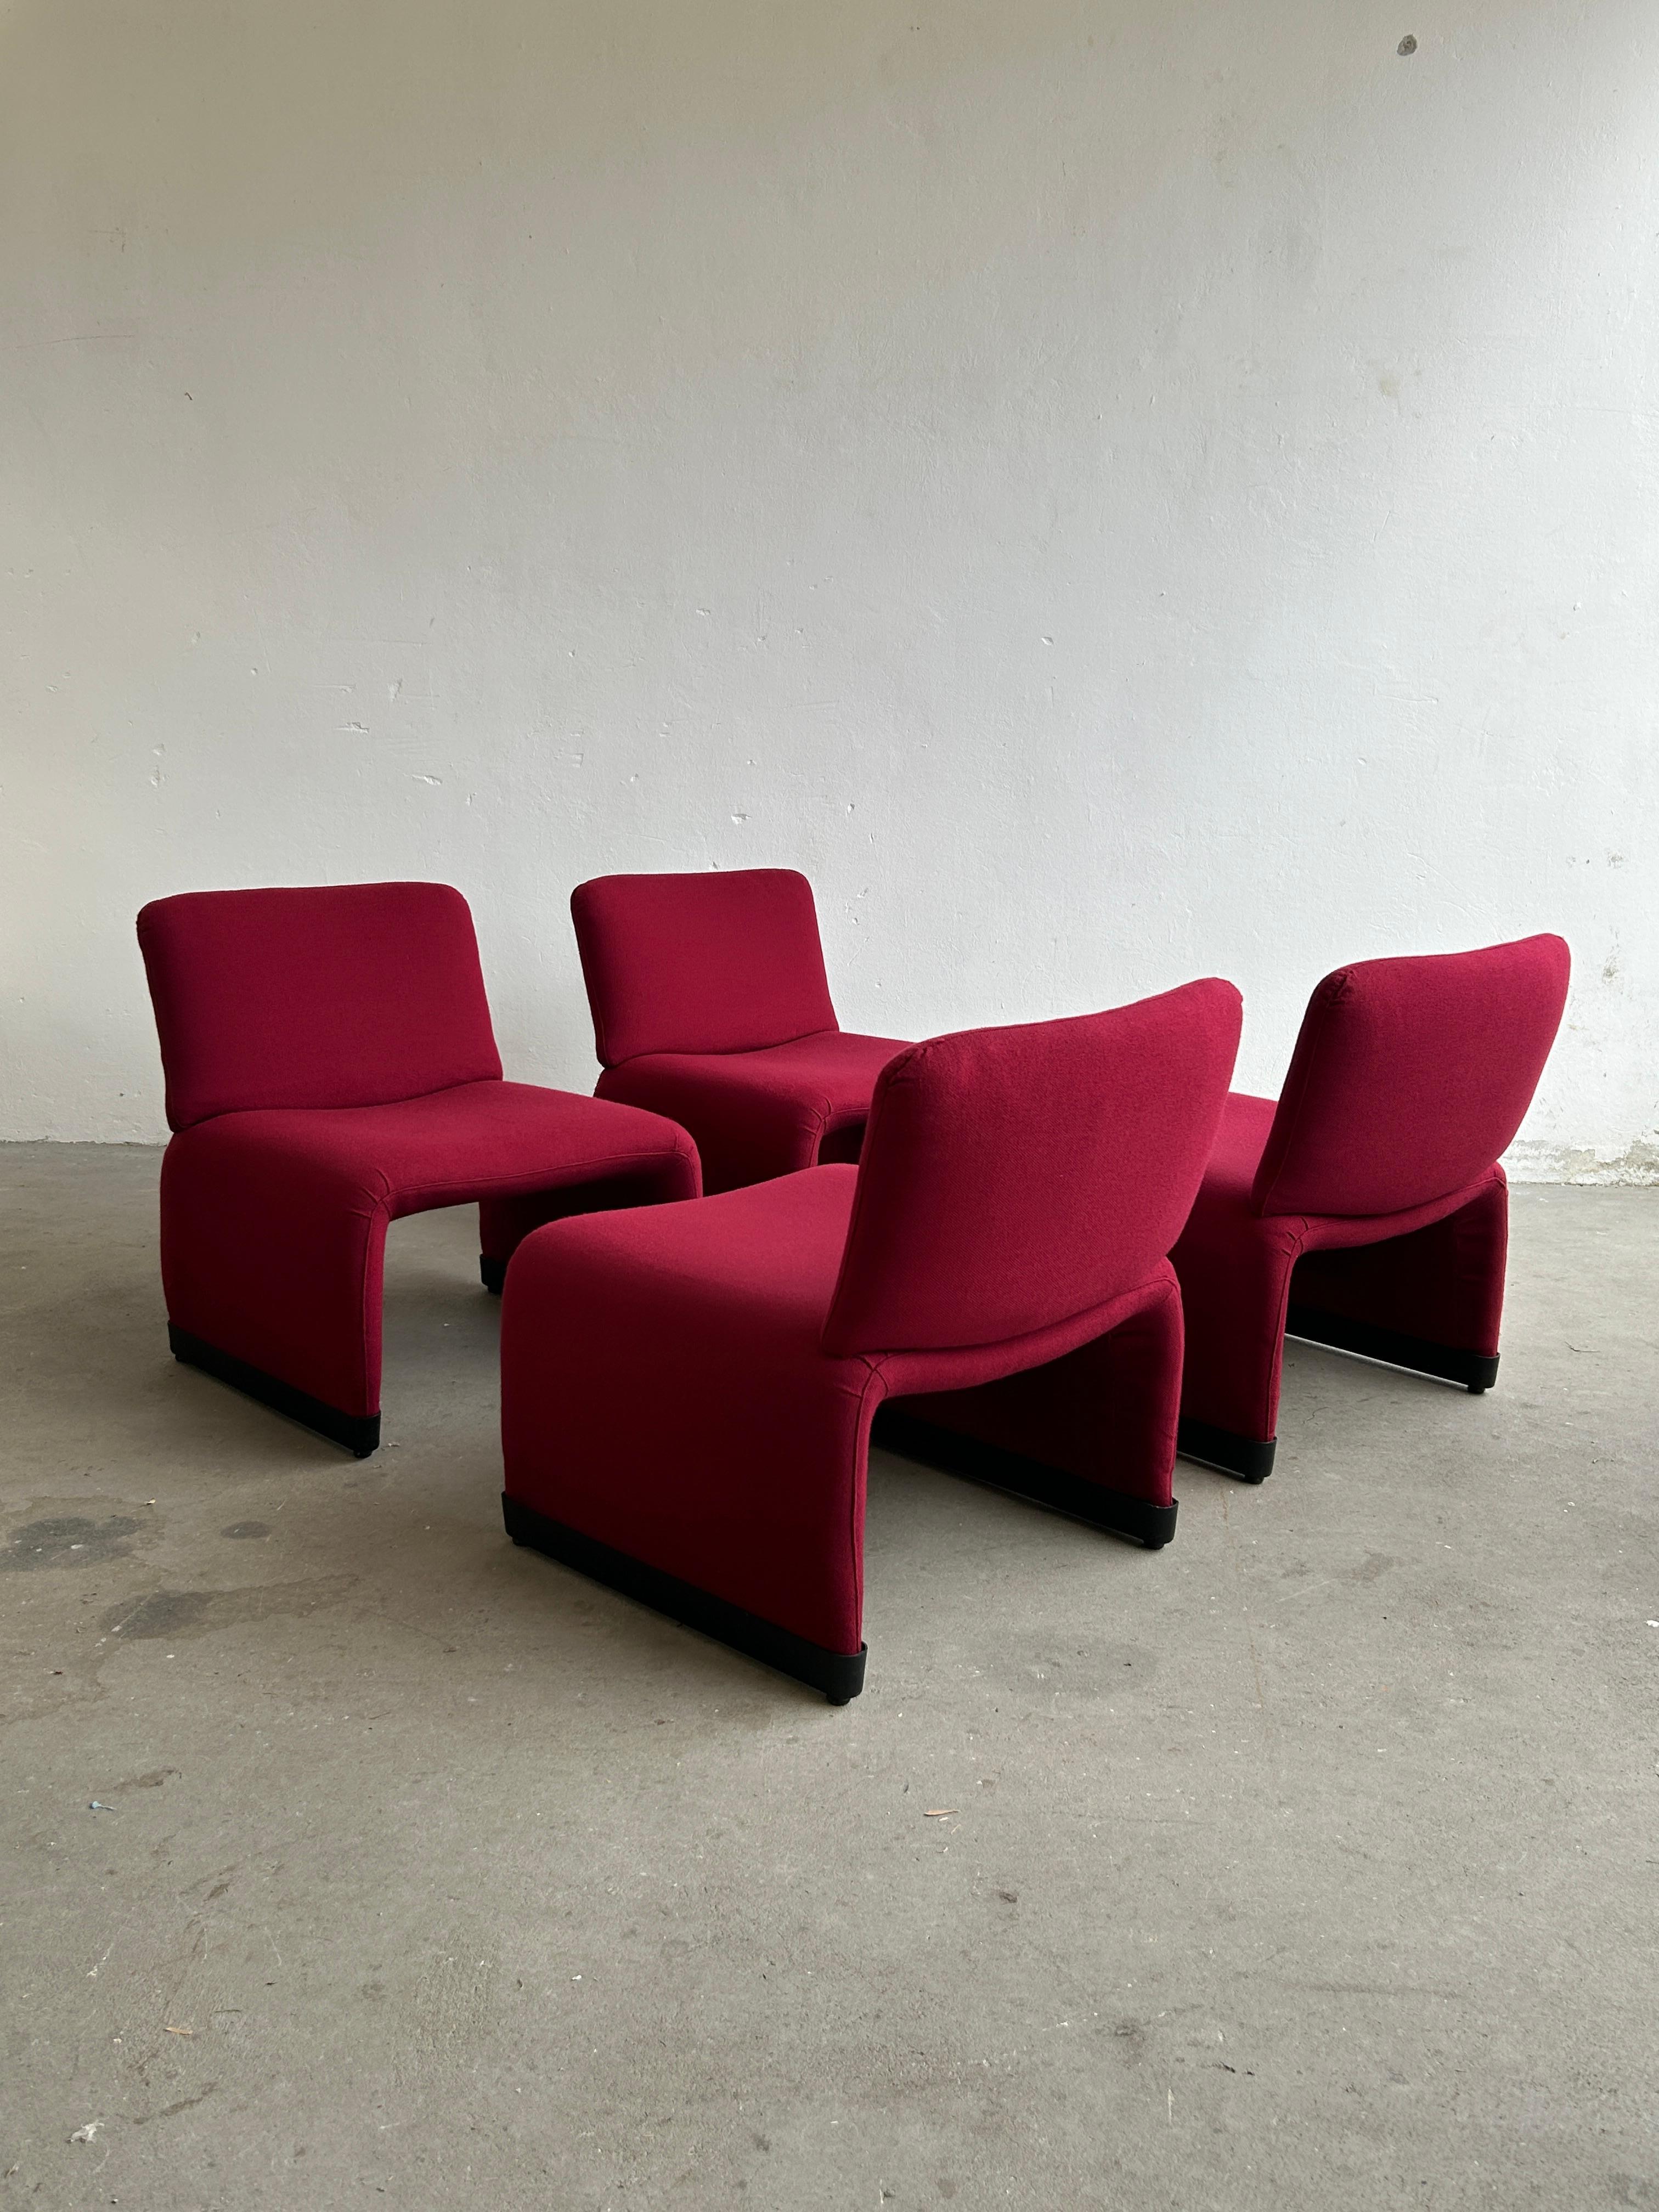 Late 20th Century Italian Lounge Chairs in Style of 'Alky' Chair by Giancarlo Piretti, 1970s